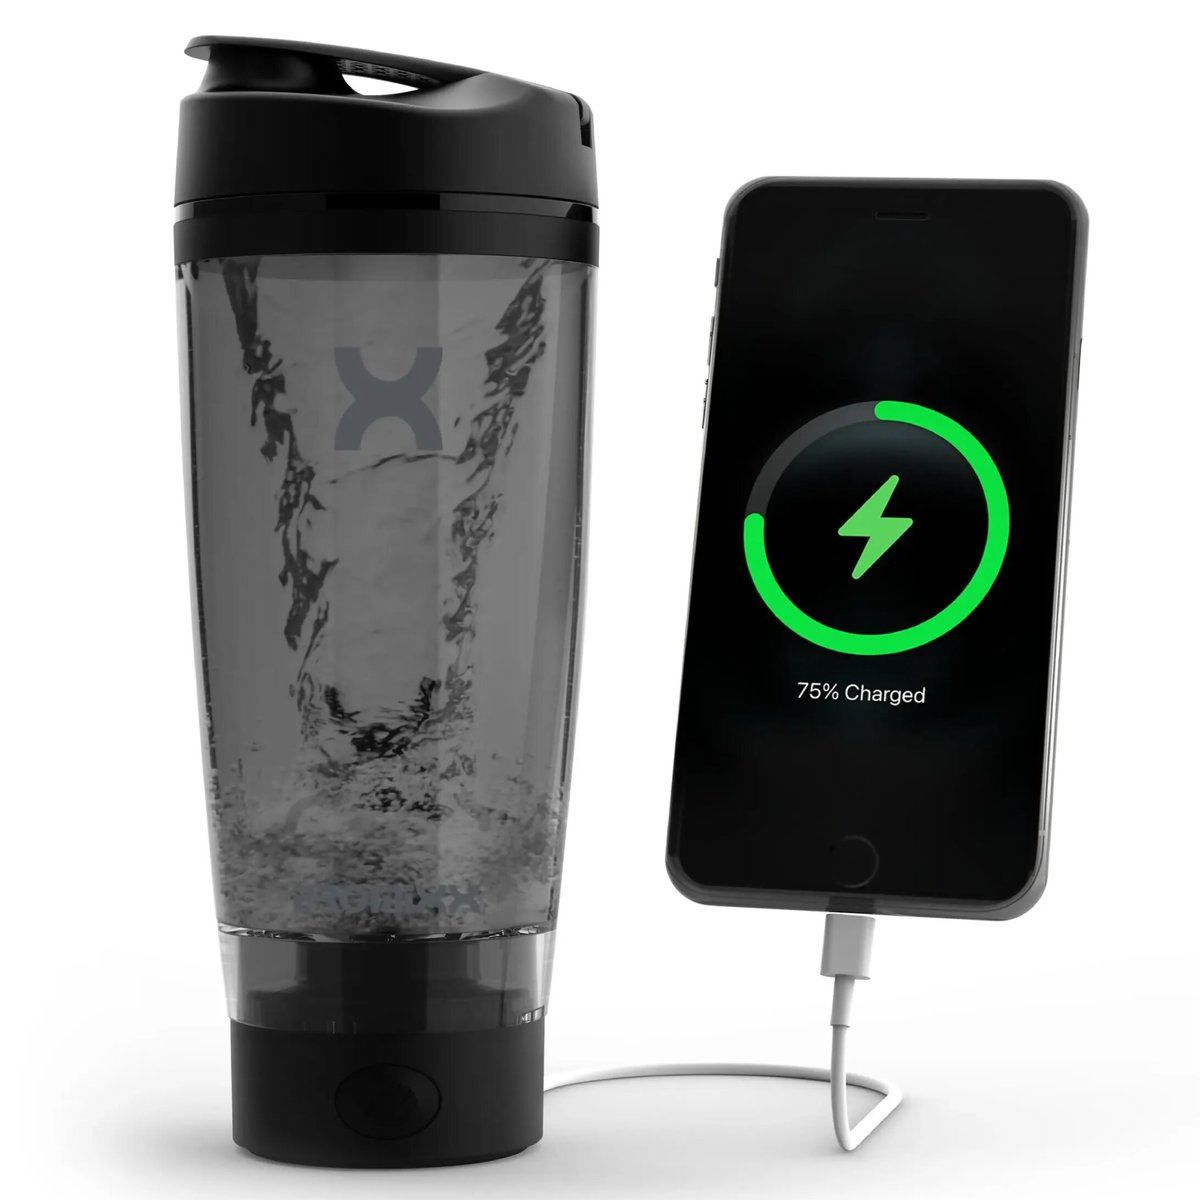 Keep your phone and your workout fueled for longer with PROMiXX CHARGE. No more interruptions, no more excuses.

promixx.com/products/charge

#staycharged #energyboost